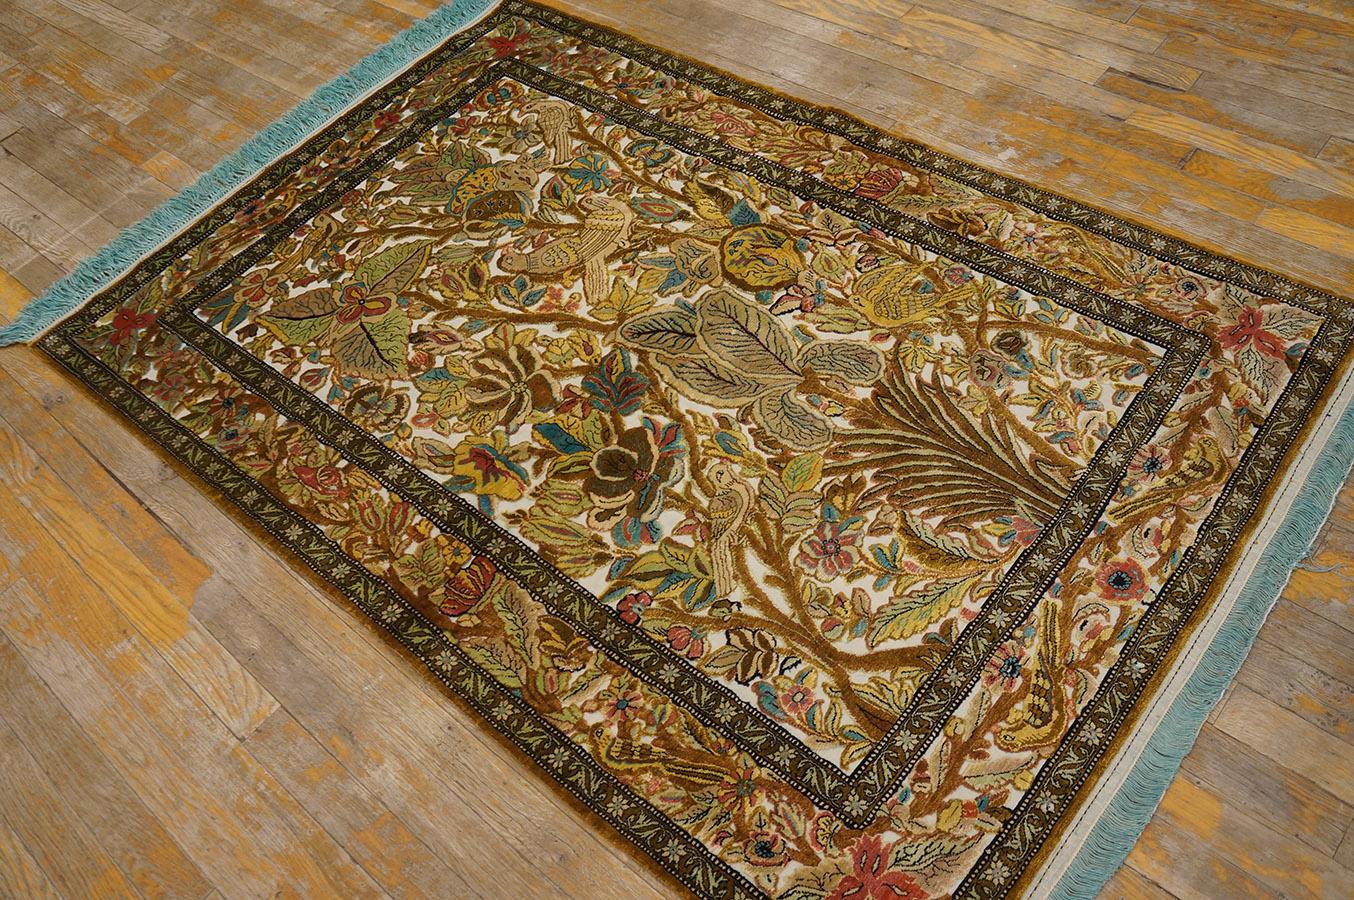 Hand-Knotted Mid 20th Century Persian Silk Souf Qum Carpet 3'6